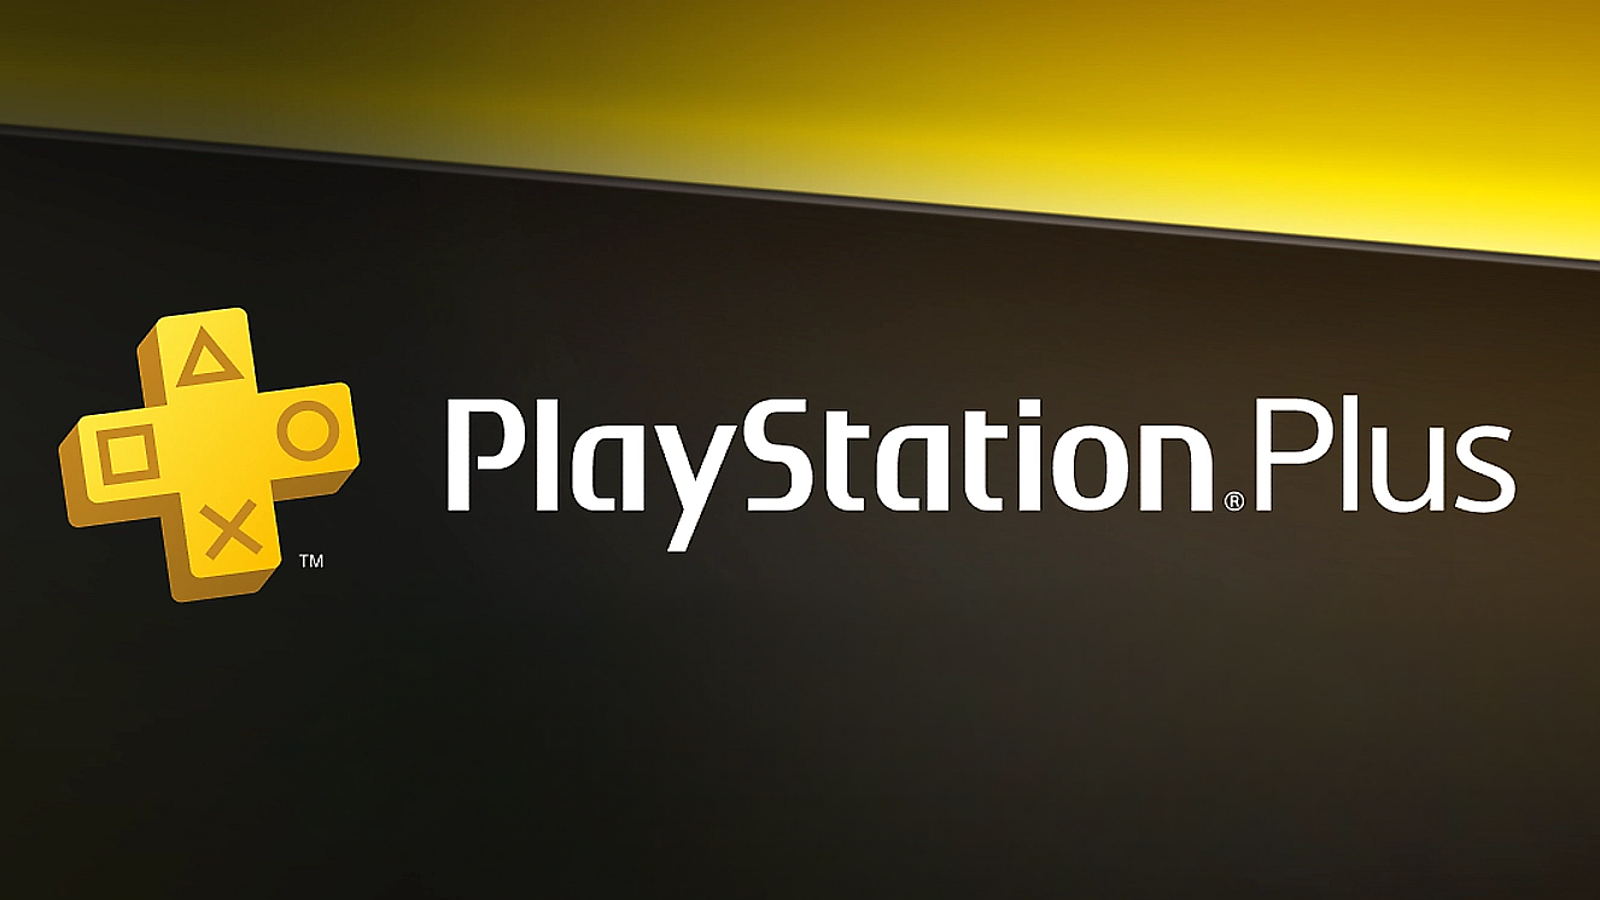 PS Plus weekend - you can play multiplayer online games free